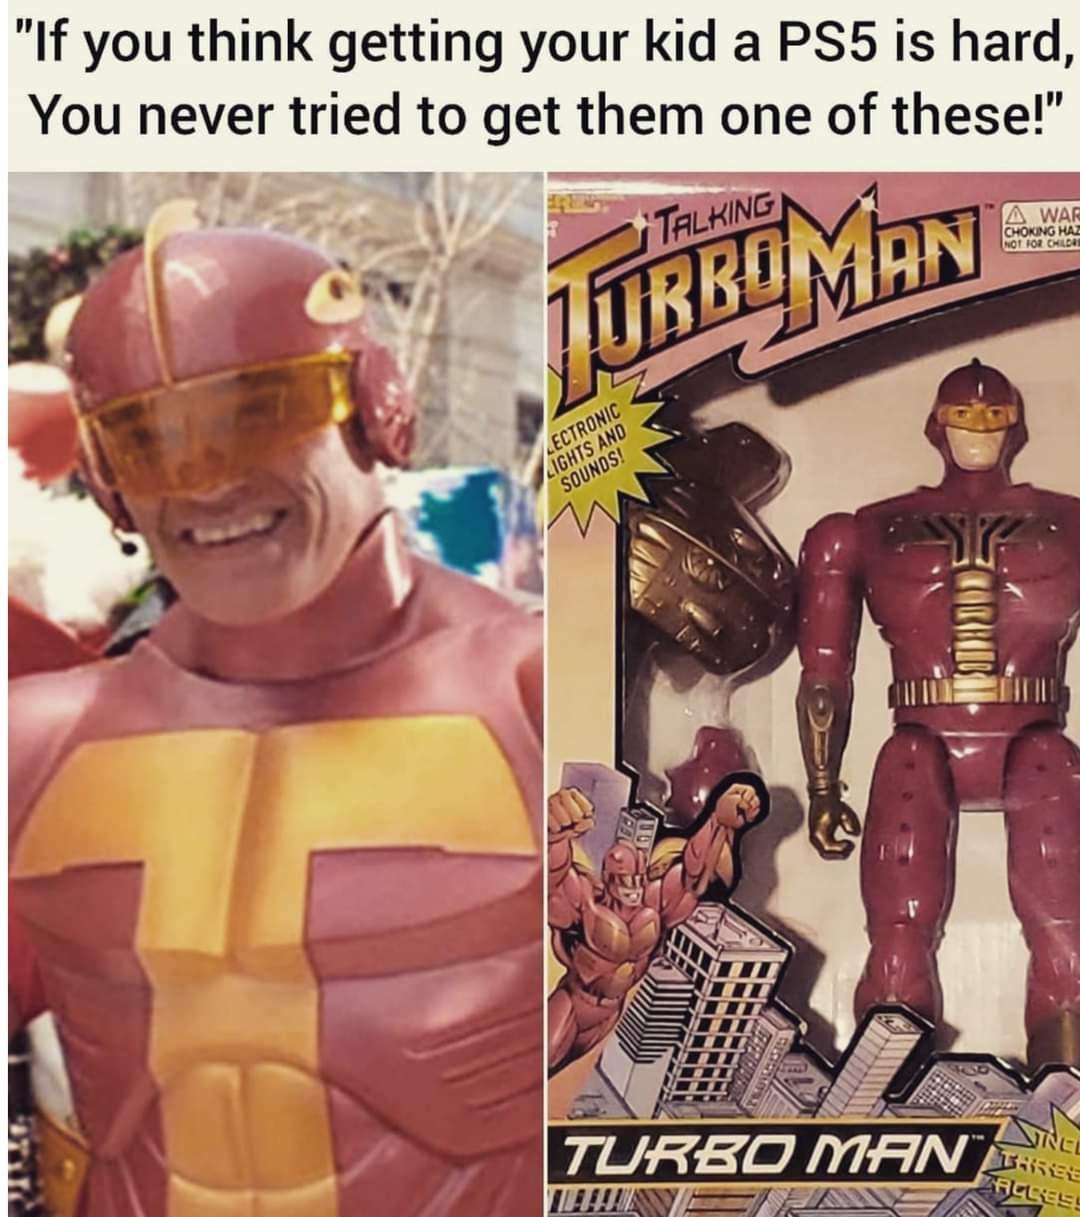 turbo man - Son "If you think getting your kid a PS5 is hard, You never tried to get them one of these!" Talking A War Choking Hal Not For Childre Turboman Ectronic Lights And Sounds! Sc Turbo Manila Aless